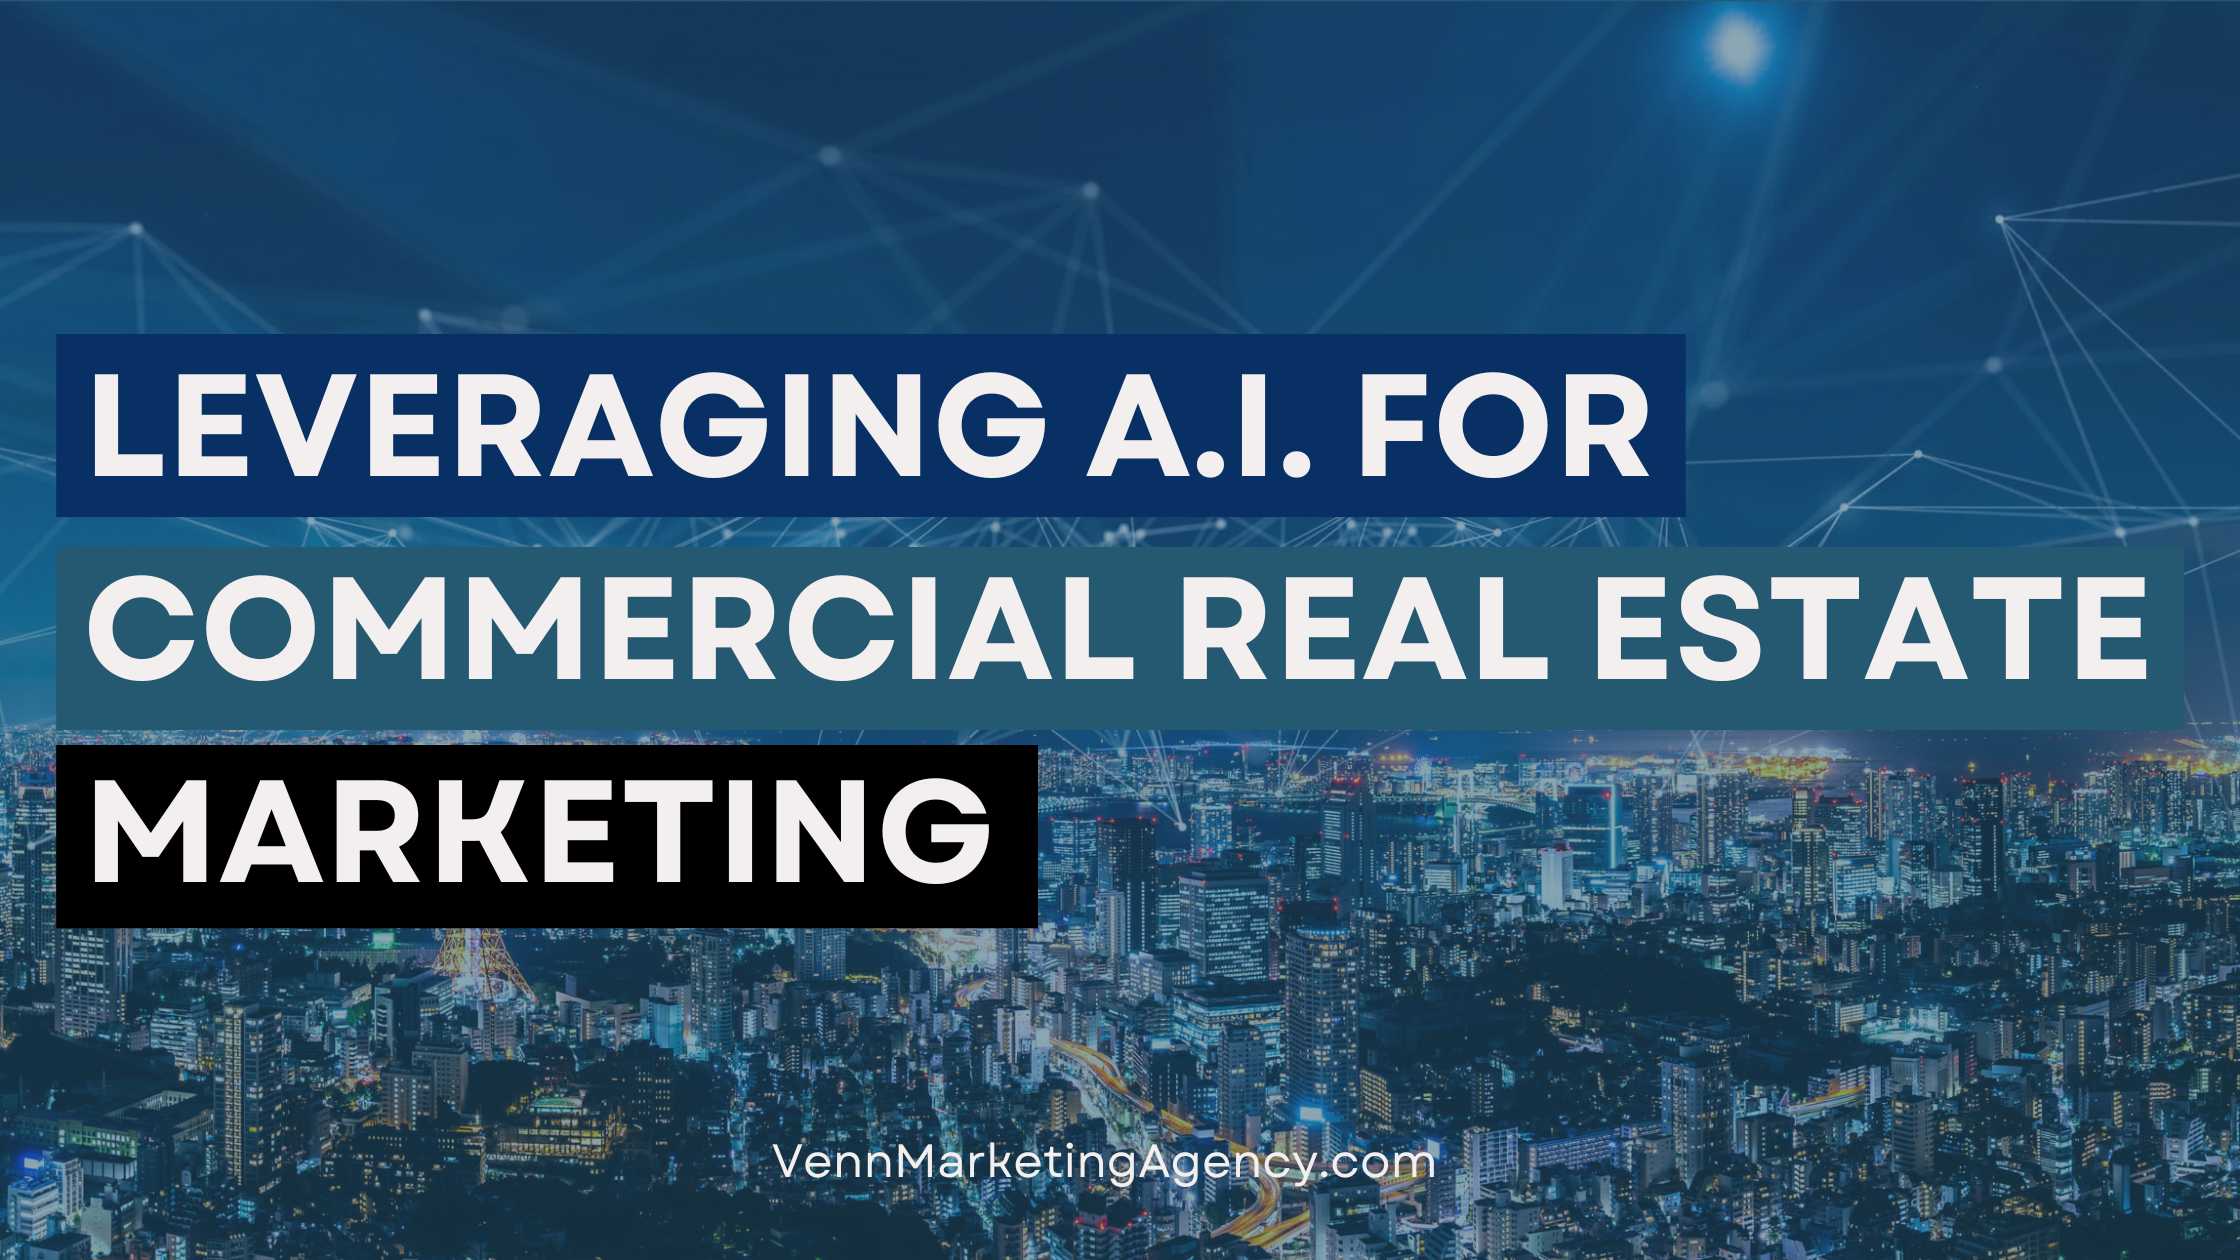 Leveraging A.I. for Commercial Real Estate Marketing